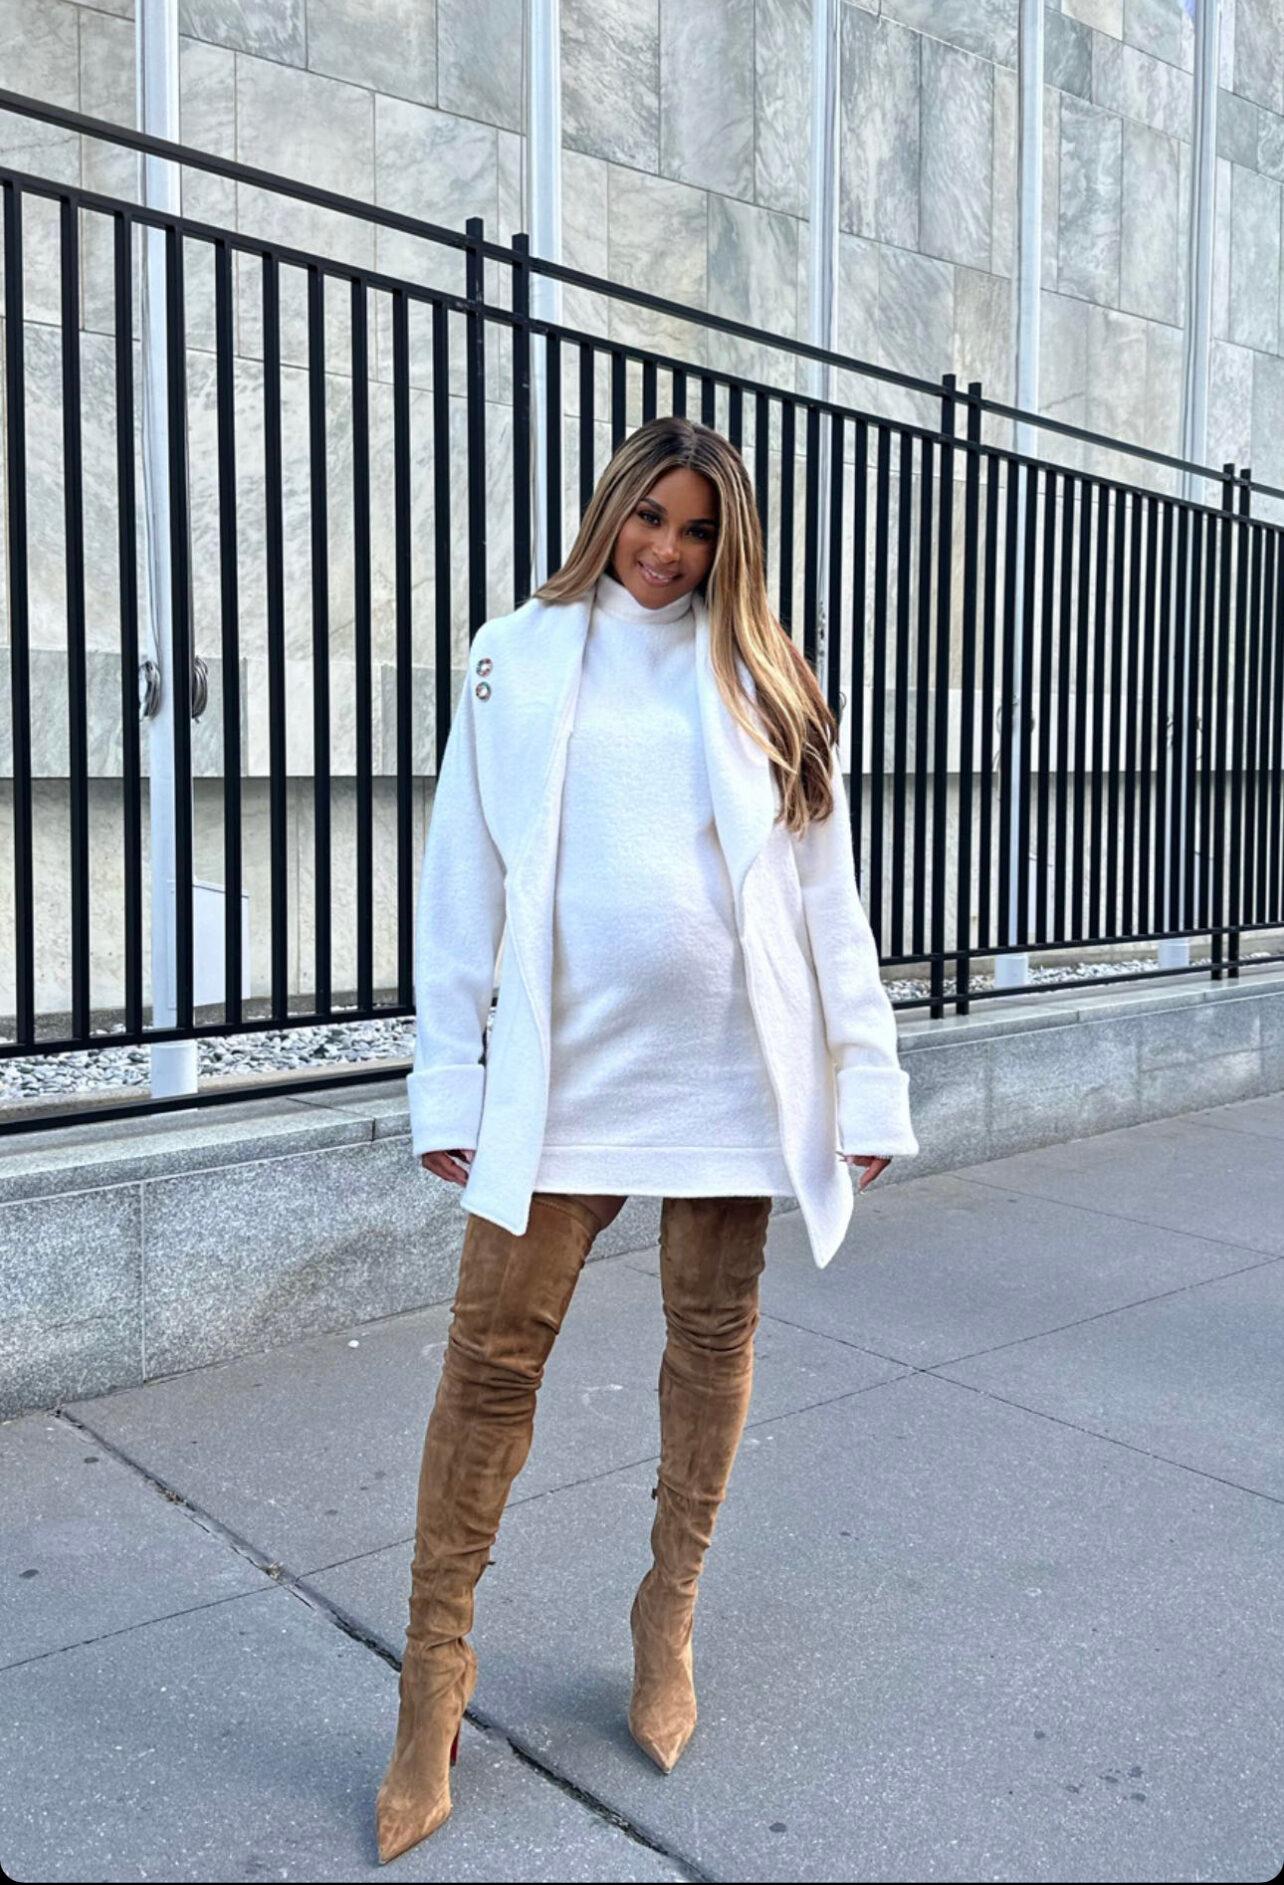 Ciara Shows Off Huge Baby Bump In Thigh High Boots And White Mini Dress